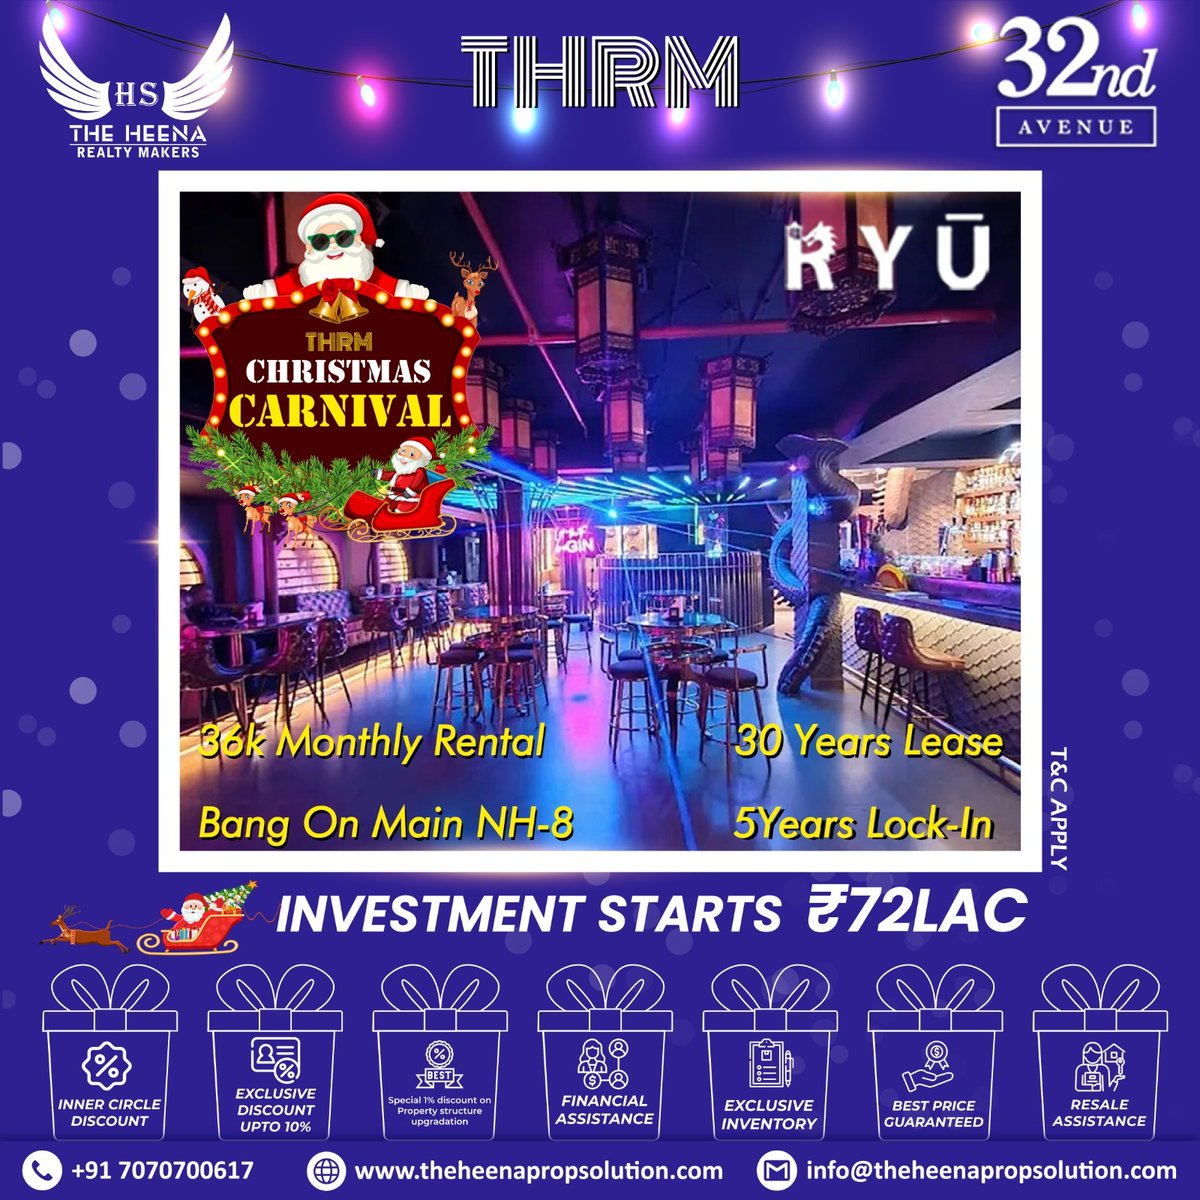 🌟 Unlock prime investment at #32ndAvenue, #Gurgaon: 72 lac entry, 36k monthly benefit, 30-year NH-8 lease. Exclusive perks: Best Price Guarantee, 1% upgrade gift. Call 7070700617 during #THRM's #ChristmasCarnival (Dec 10-25). Join #THEHEENAREALTYMAKERS for #InvestmentElegance!